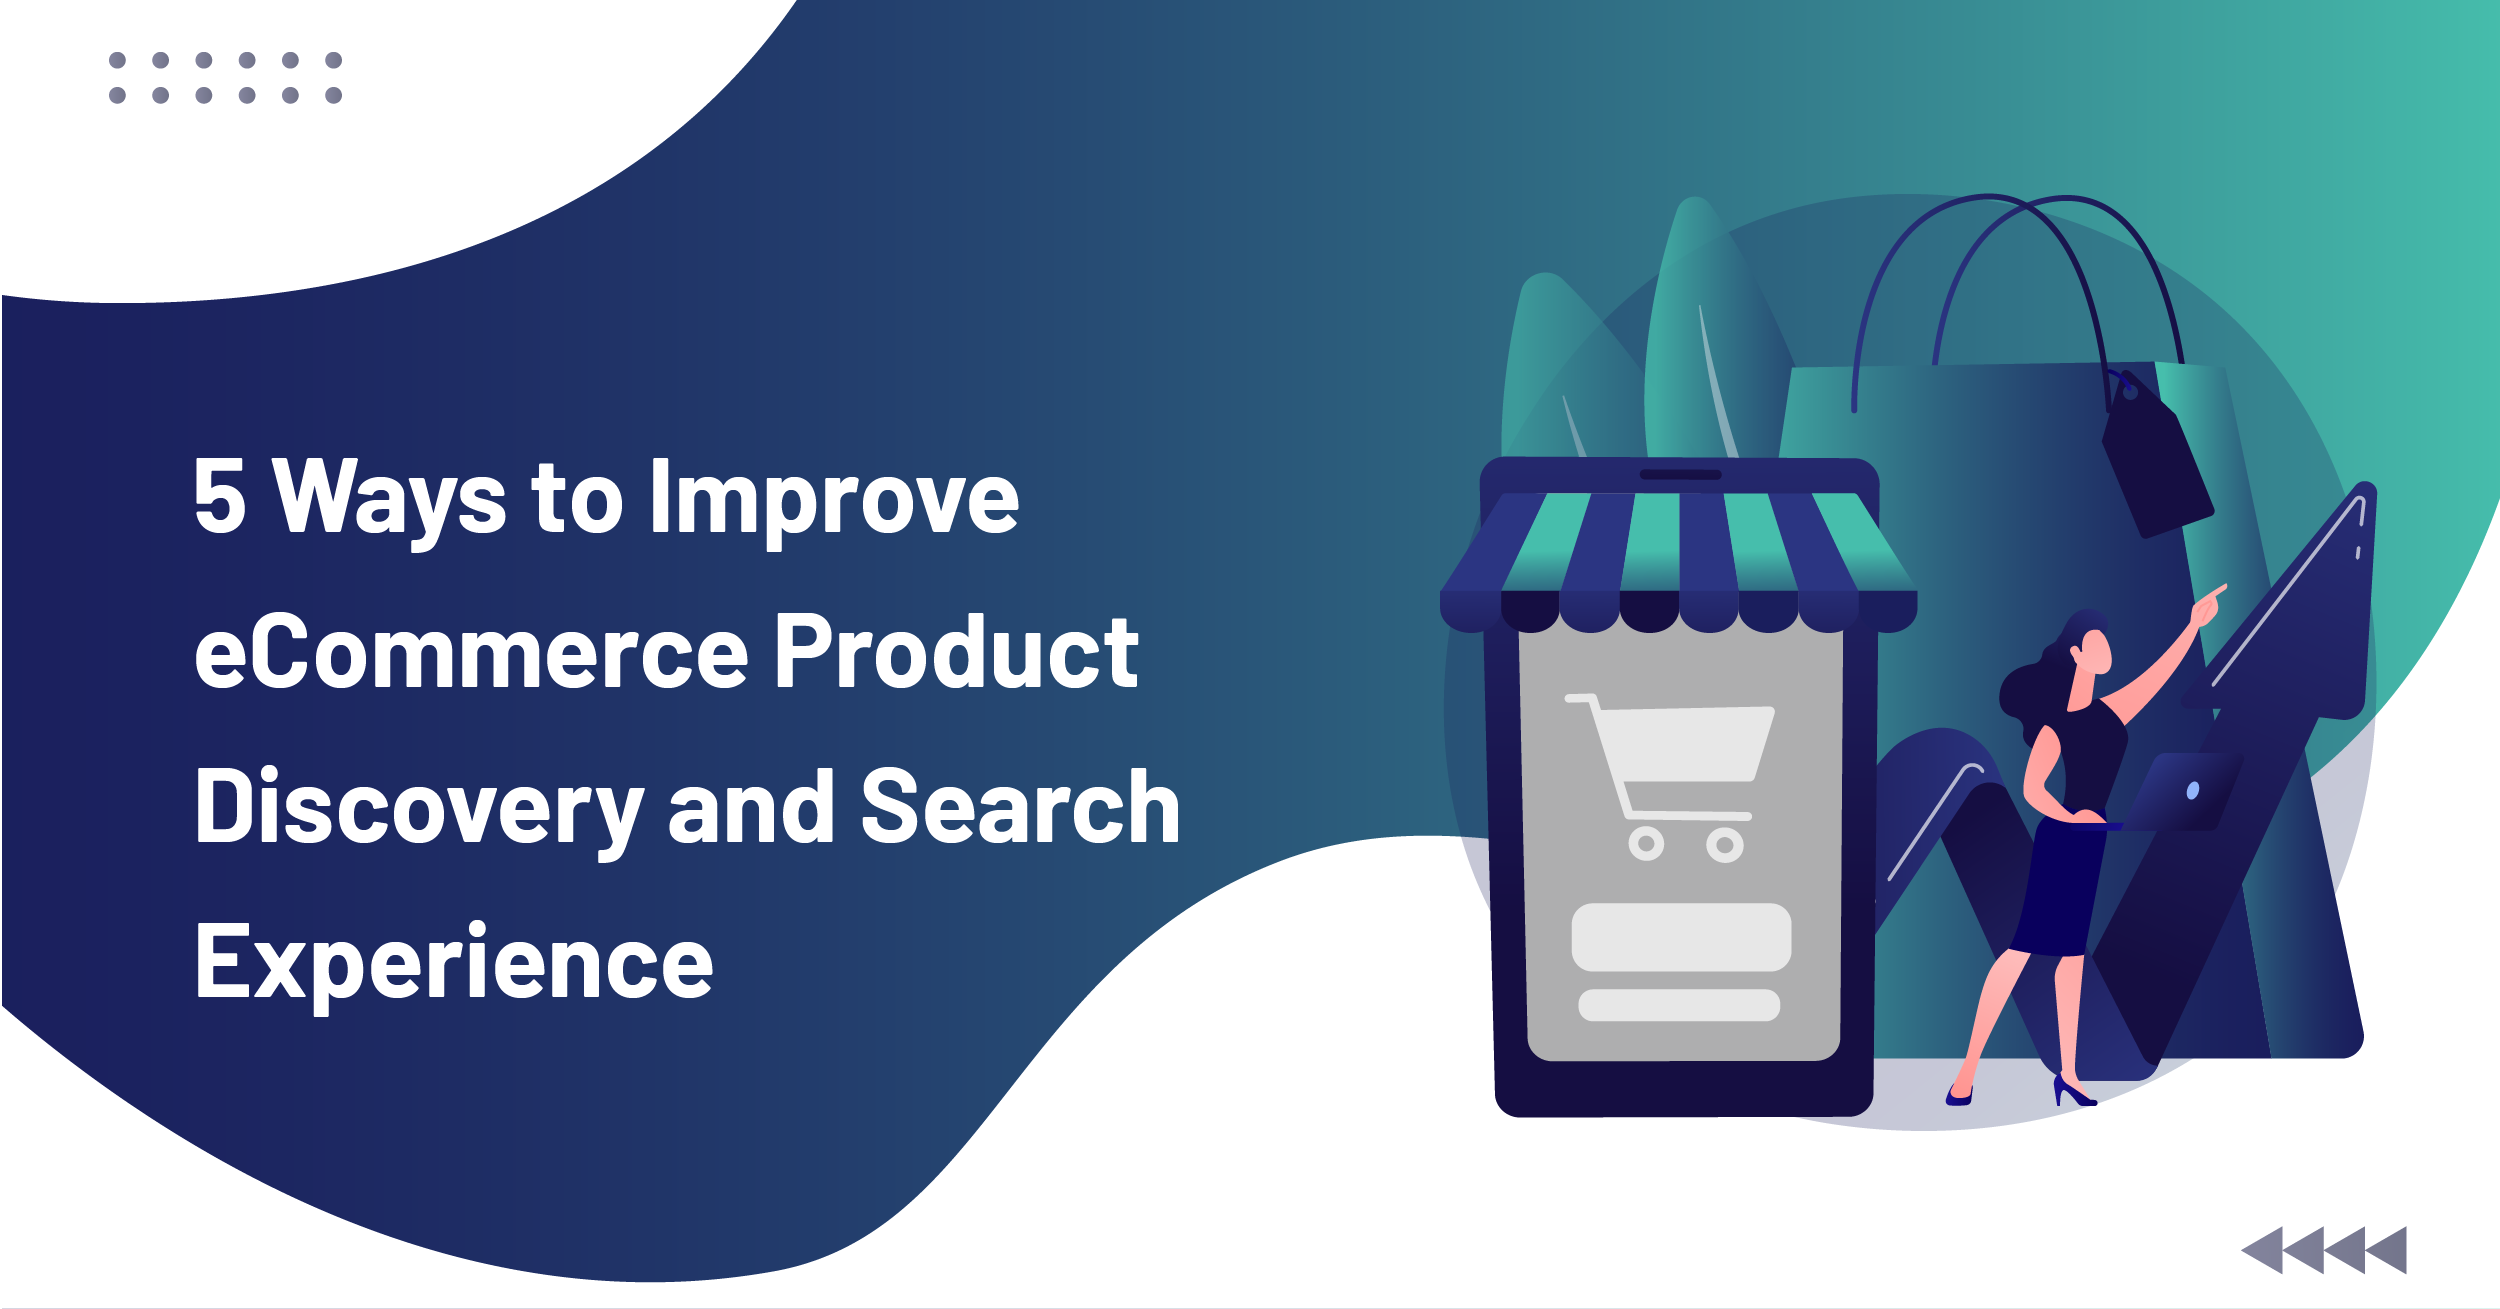 5 Ways to Improve eCommerce Product Discovery and Search Experience